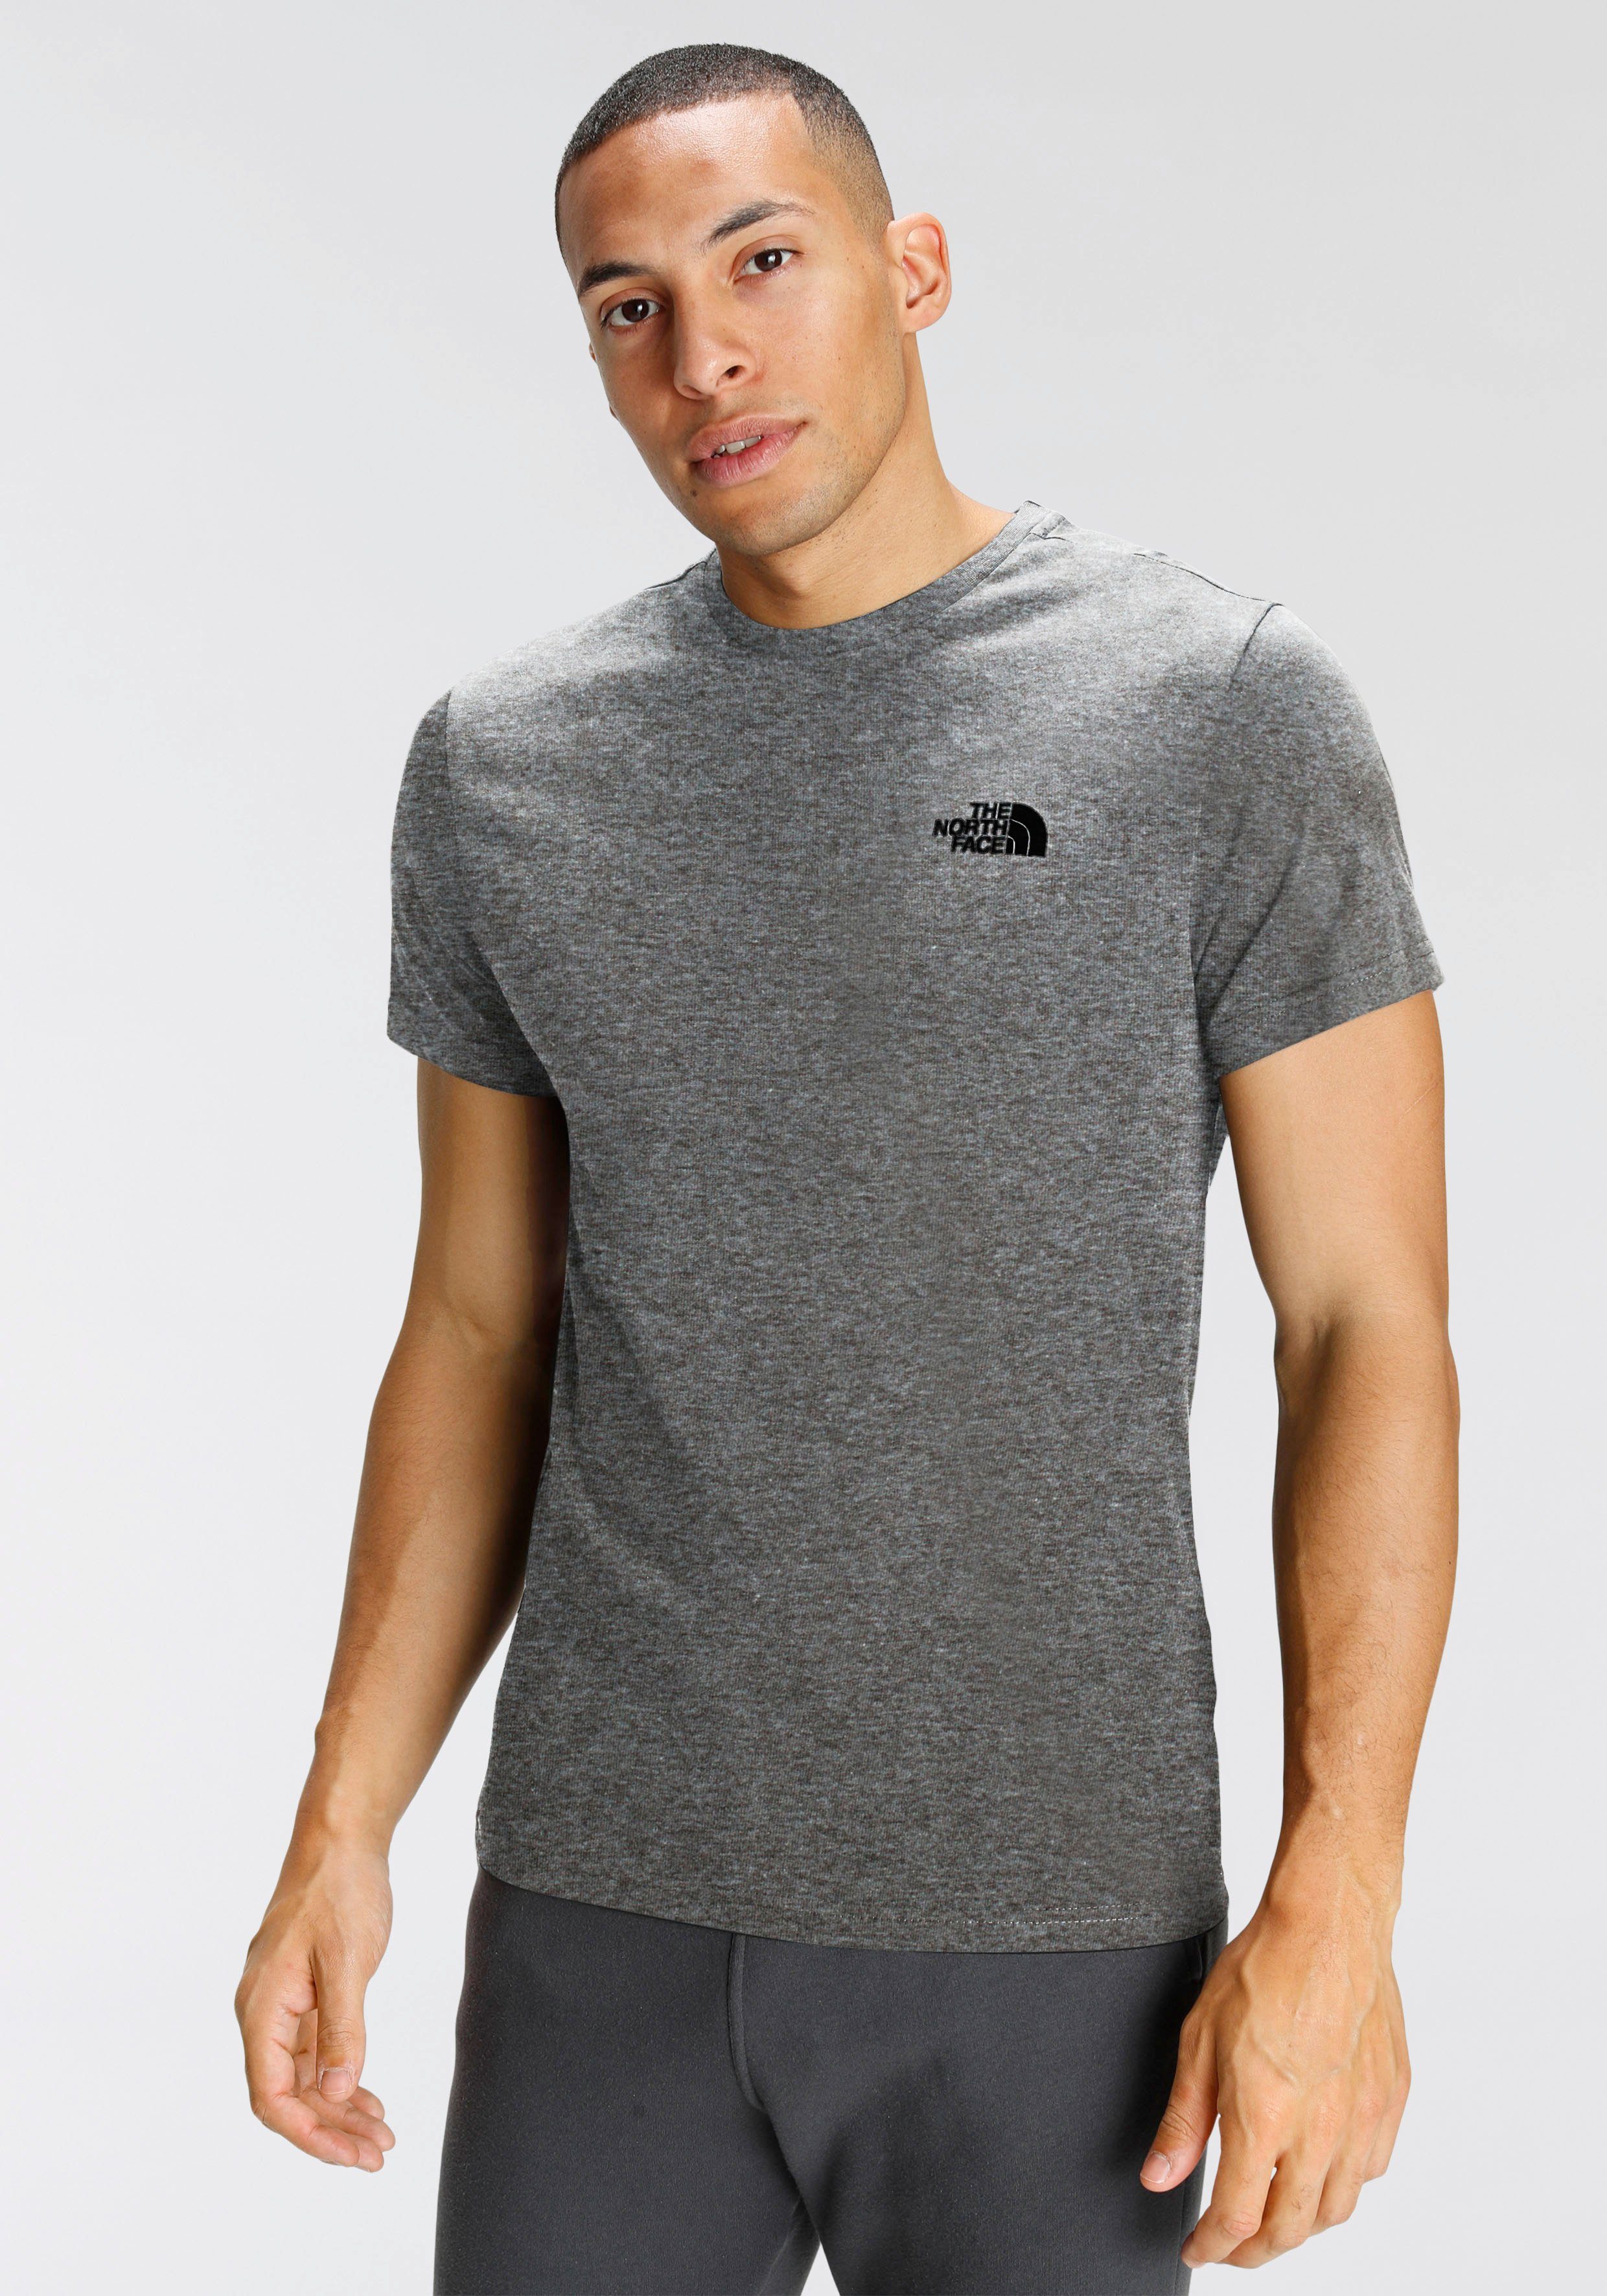 The North Face Funktionsshirt SIMPLE DOME grau-meliert